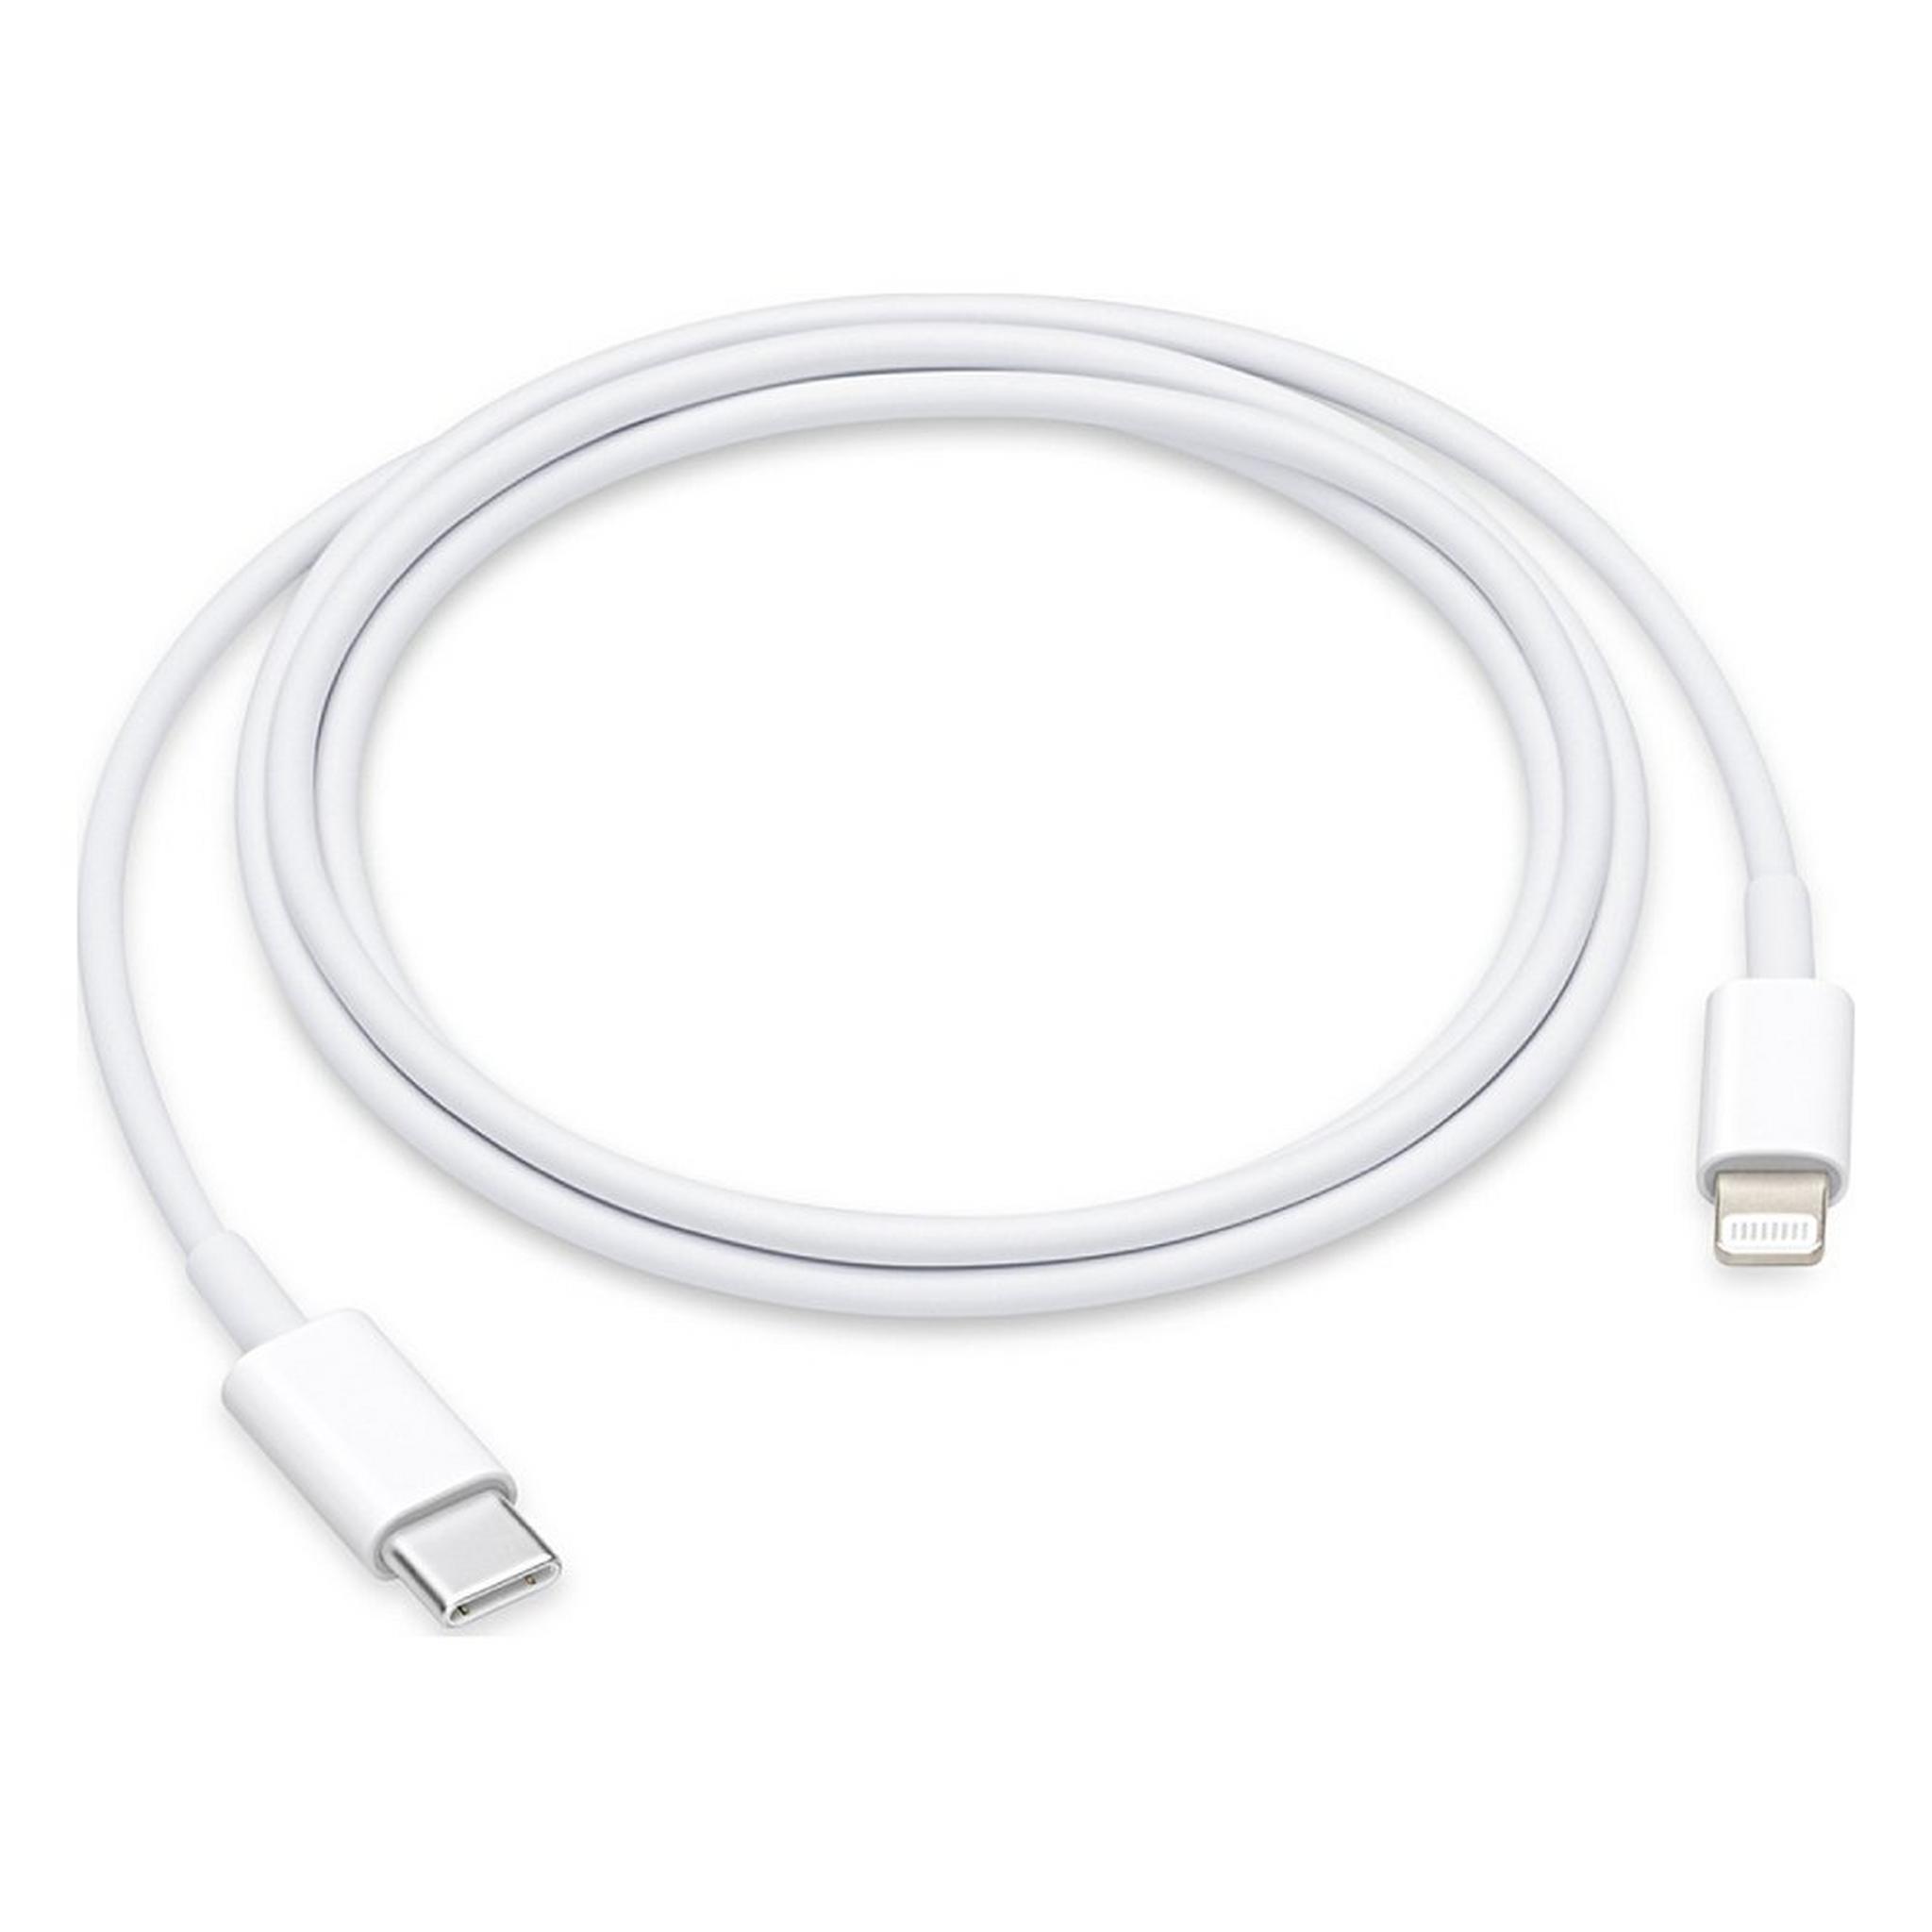 Apple USB-C to lightening Charge Cable 1m - White